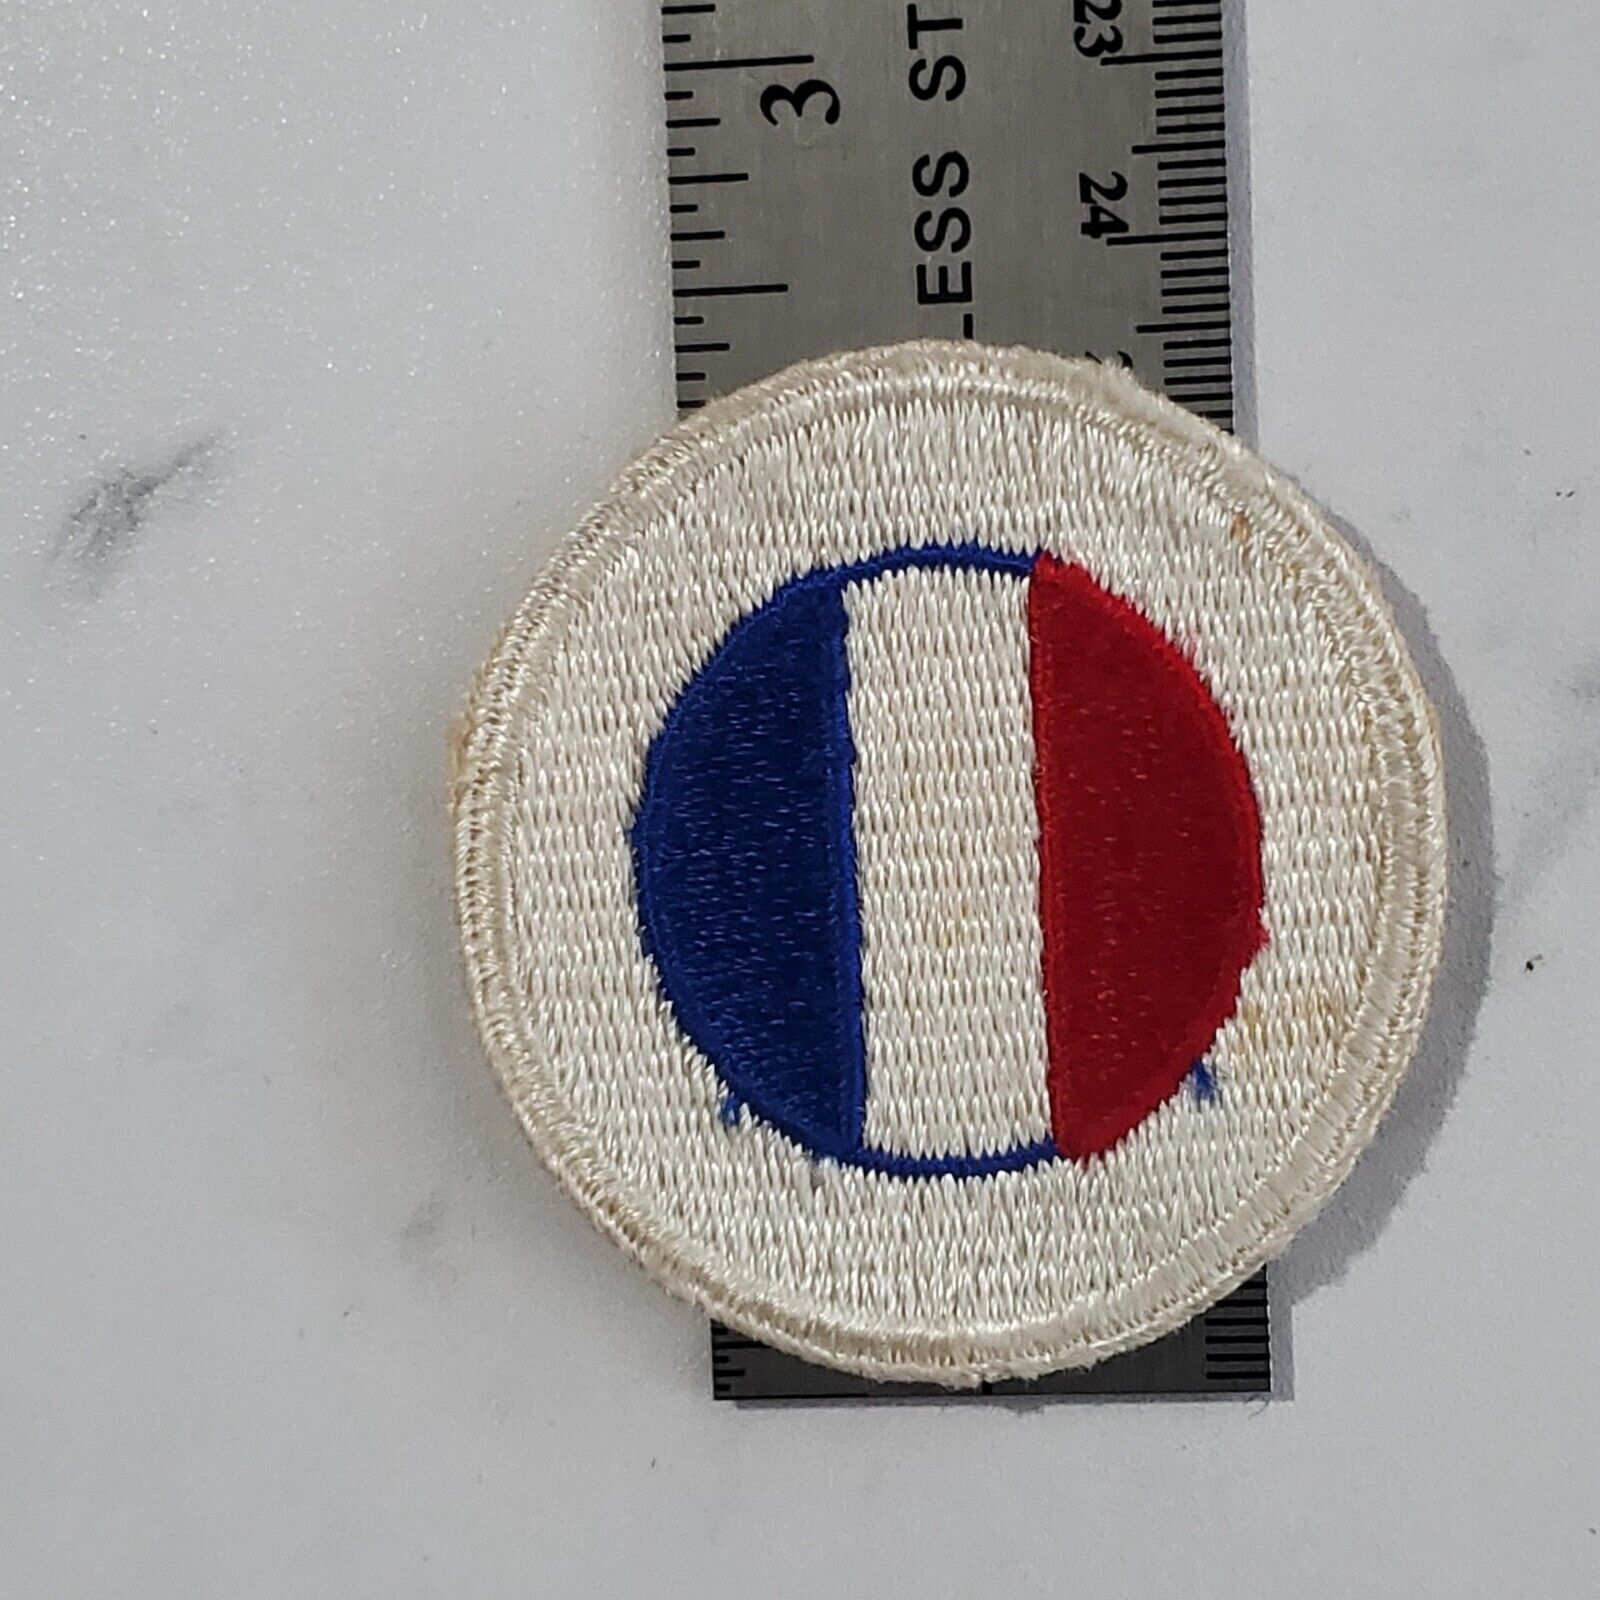 WW2 U.S. Army G.H.Q. Reserve Uniform Patch Previously Mounted